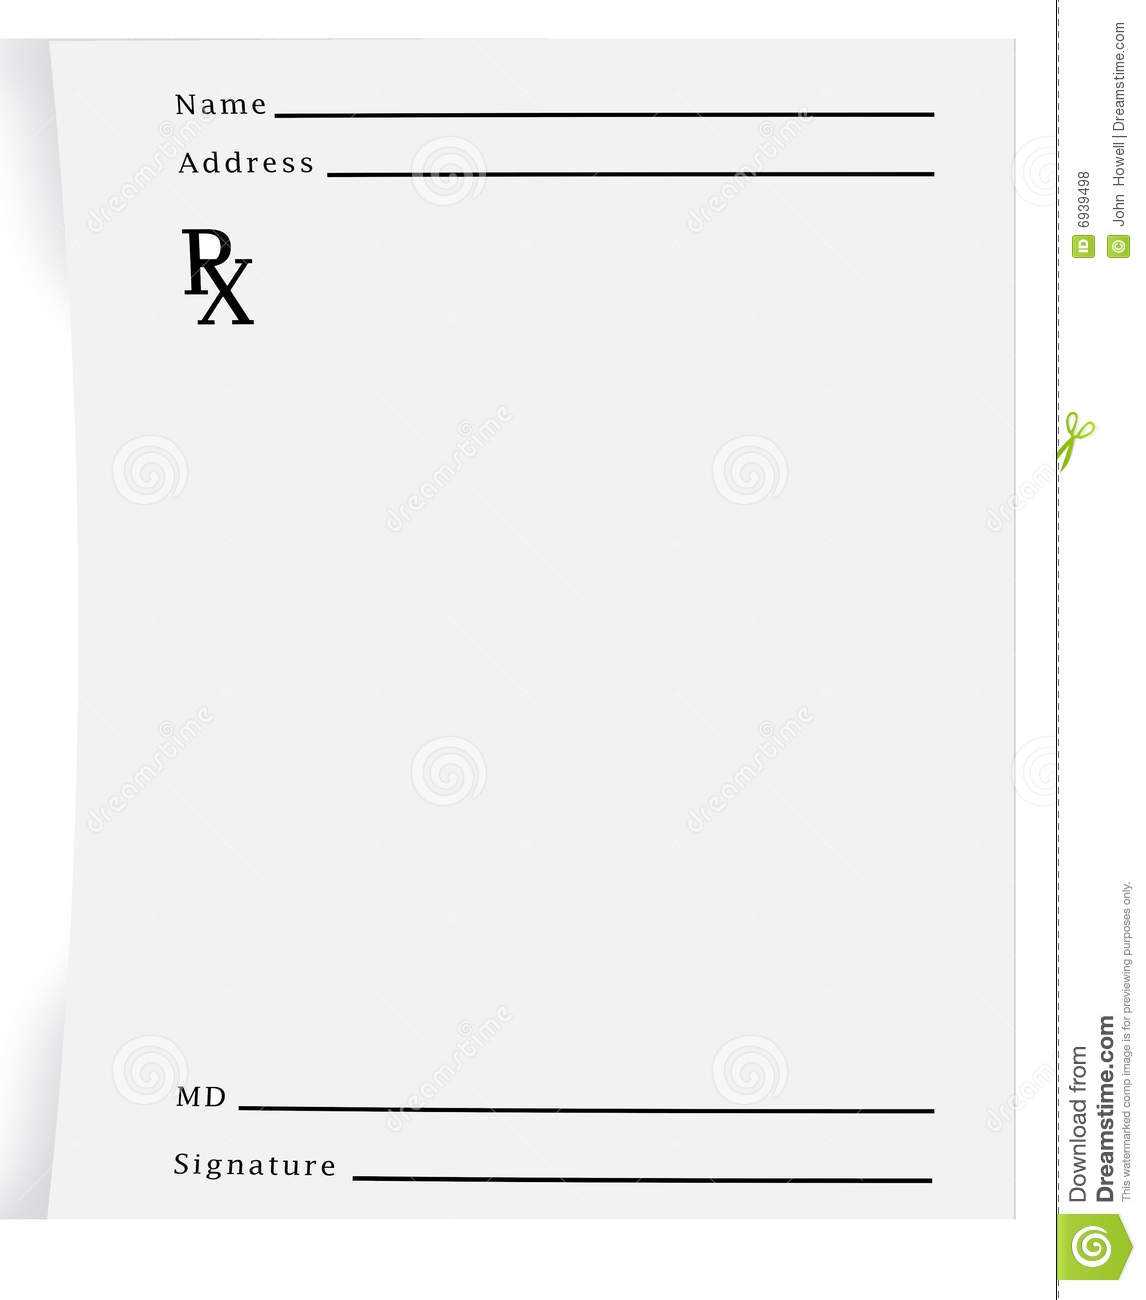 21 Images Pill Bottle Label Template Intended For Blank Prescription Form Template